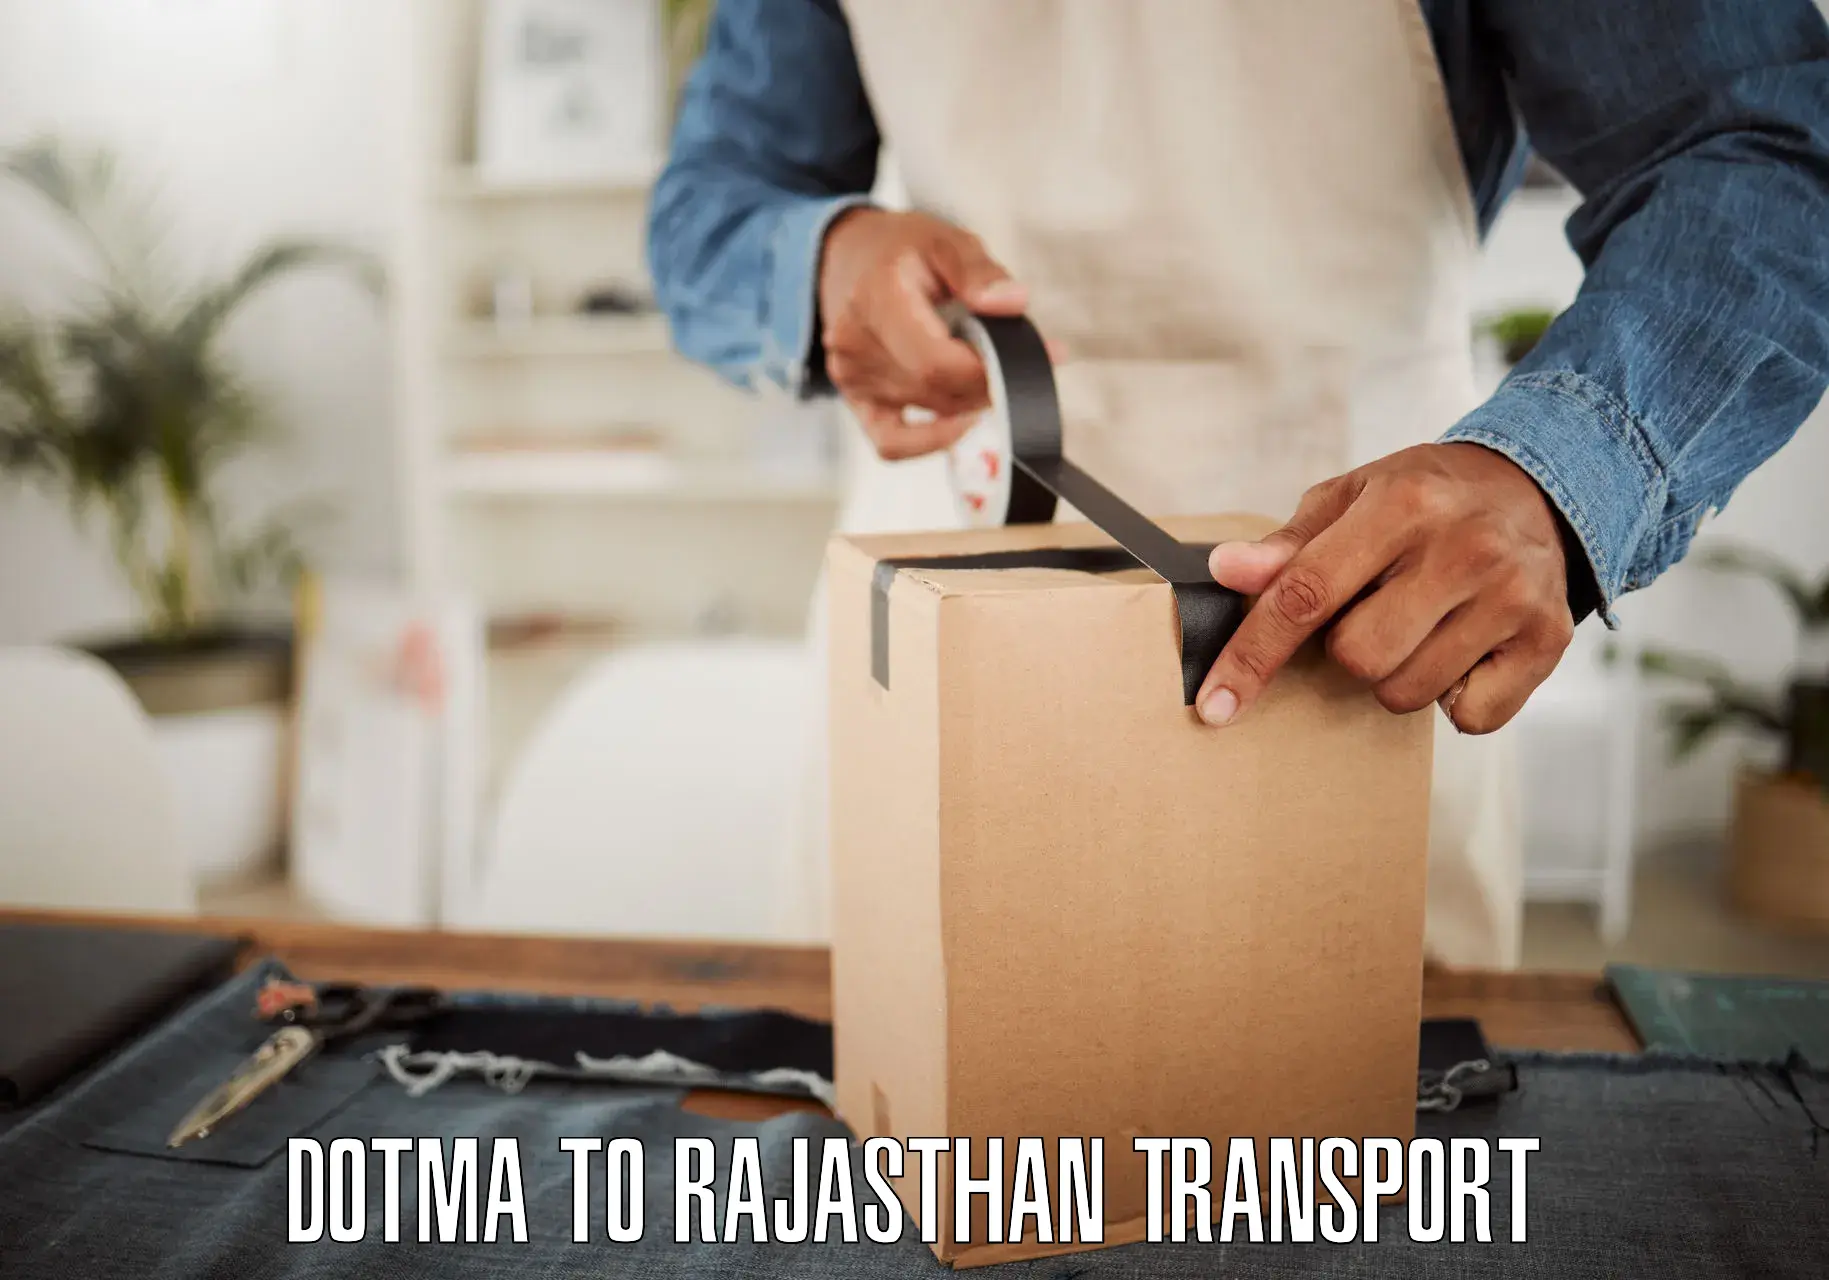 Express transport services in Dotma to Dausa